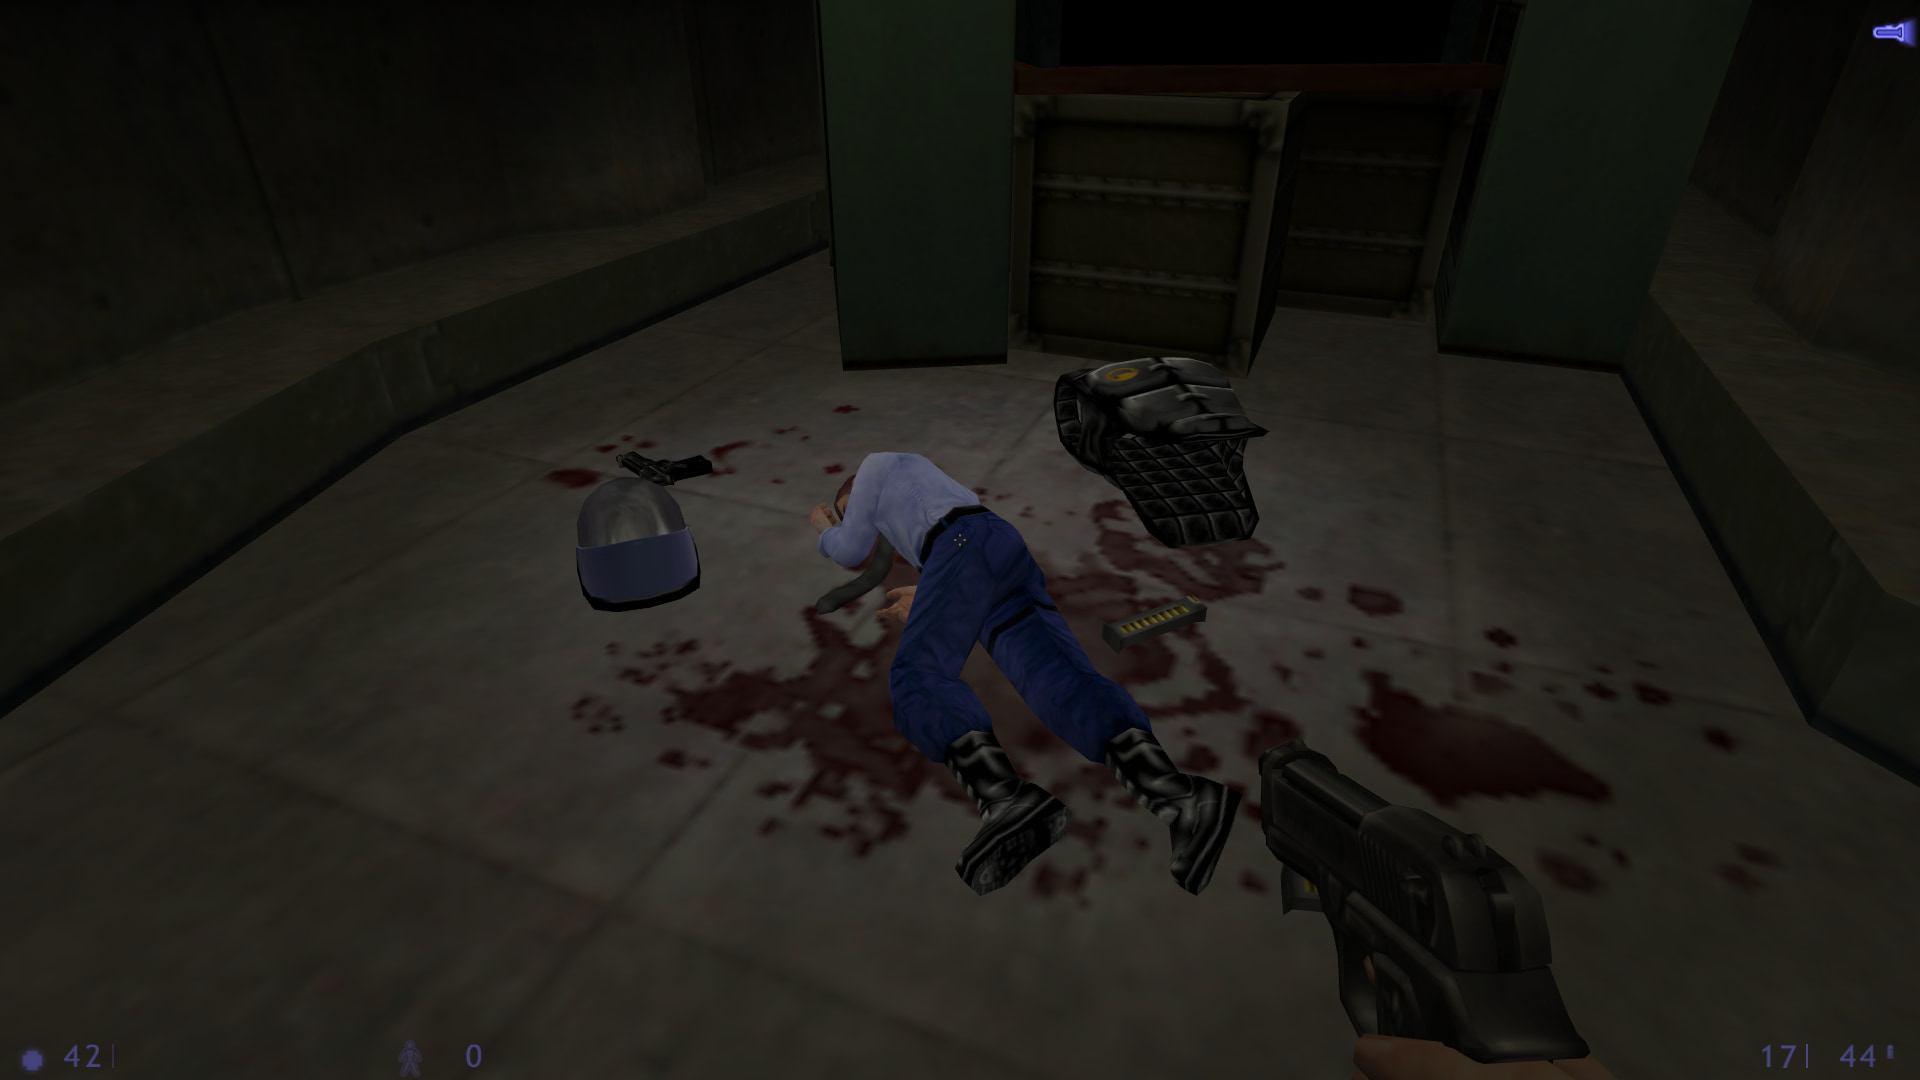 A screenshot from Half-Life: Blue Shift. The player stares at a dead security guard on the ground, with a vest, a helmet, a pistol and some ammunition lying around him.